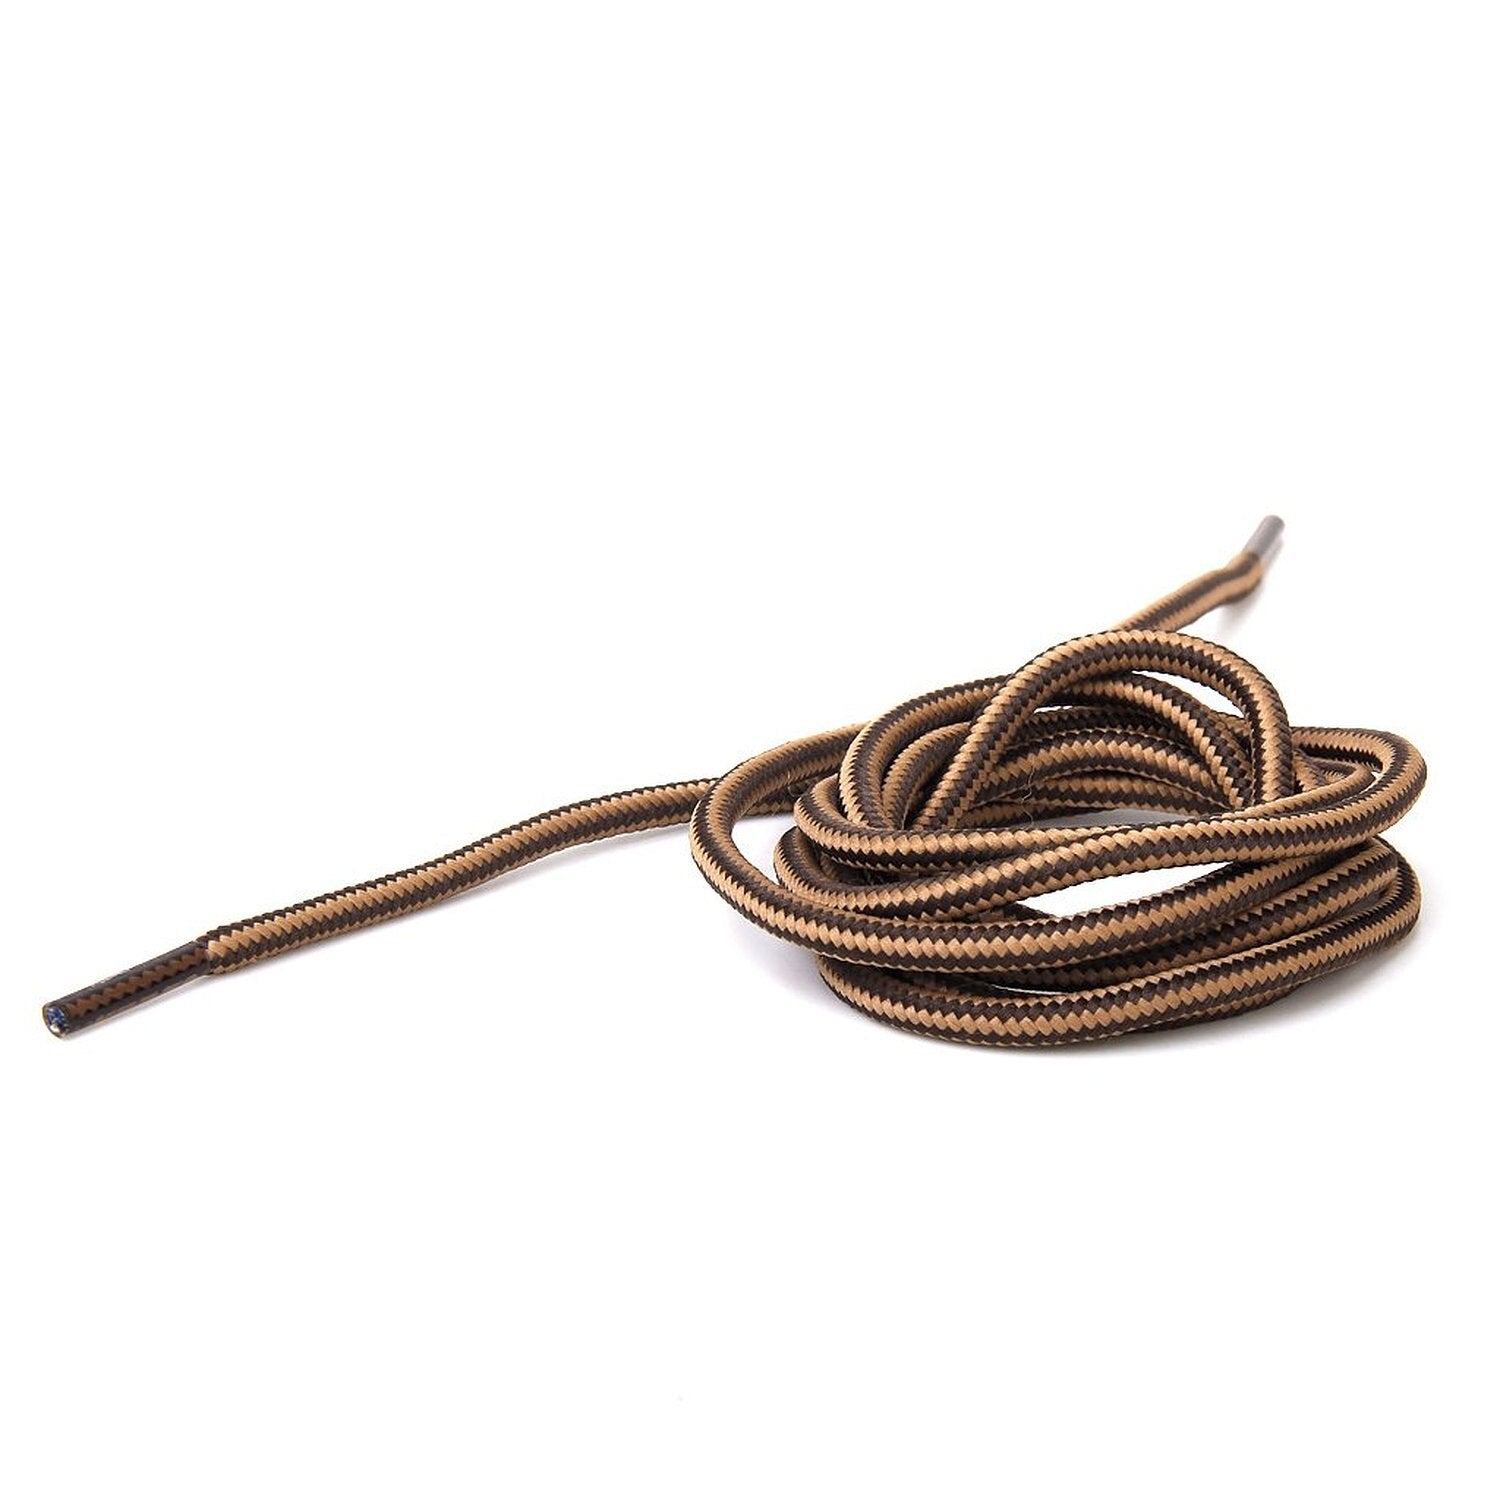 New 1 pair 150 cm Durable High Resistance Laces for Hiking Shoes - Brown Coffee Stripes - ebowsos